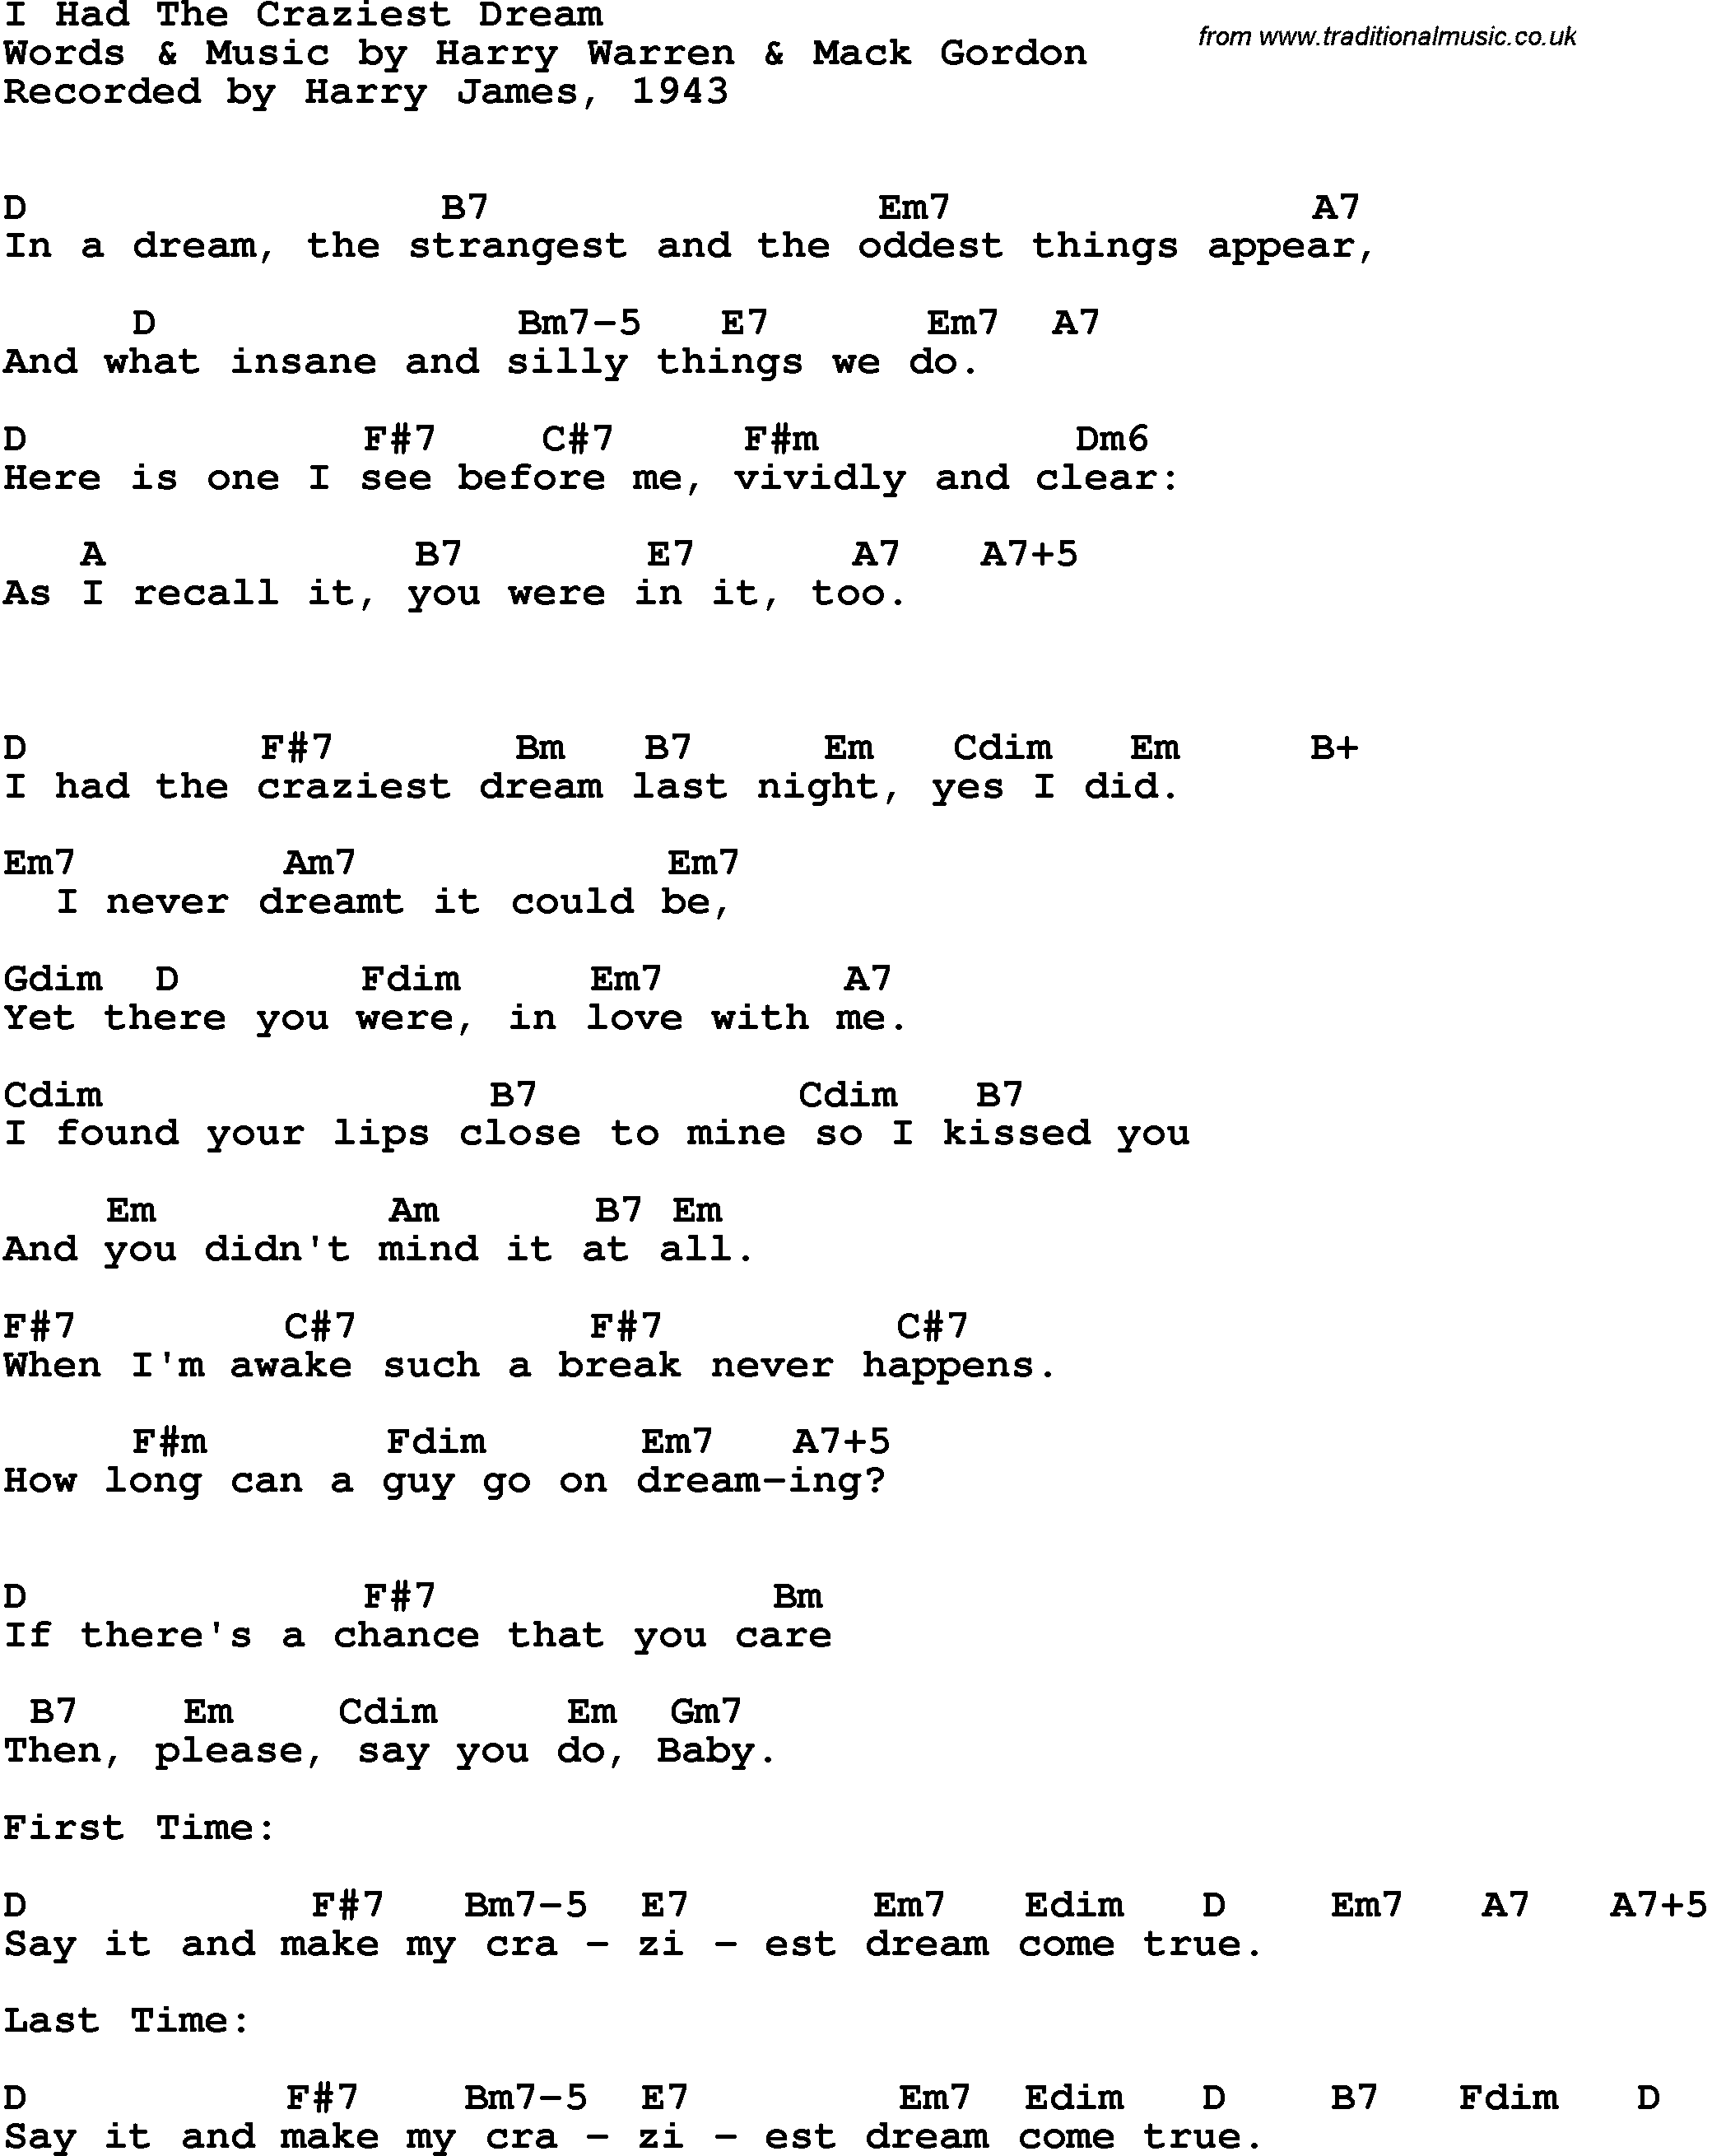 Song Lyrics with guitar chords for I Had The Craziest Dream - Harry James, 1943